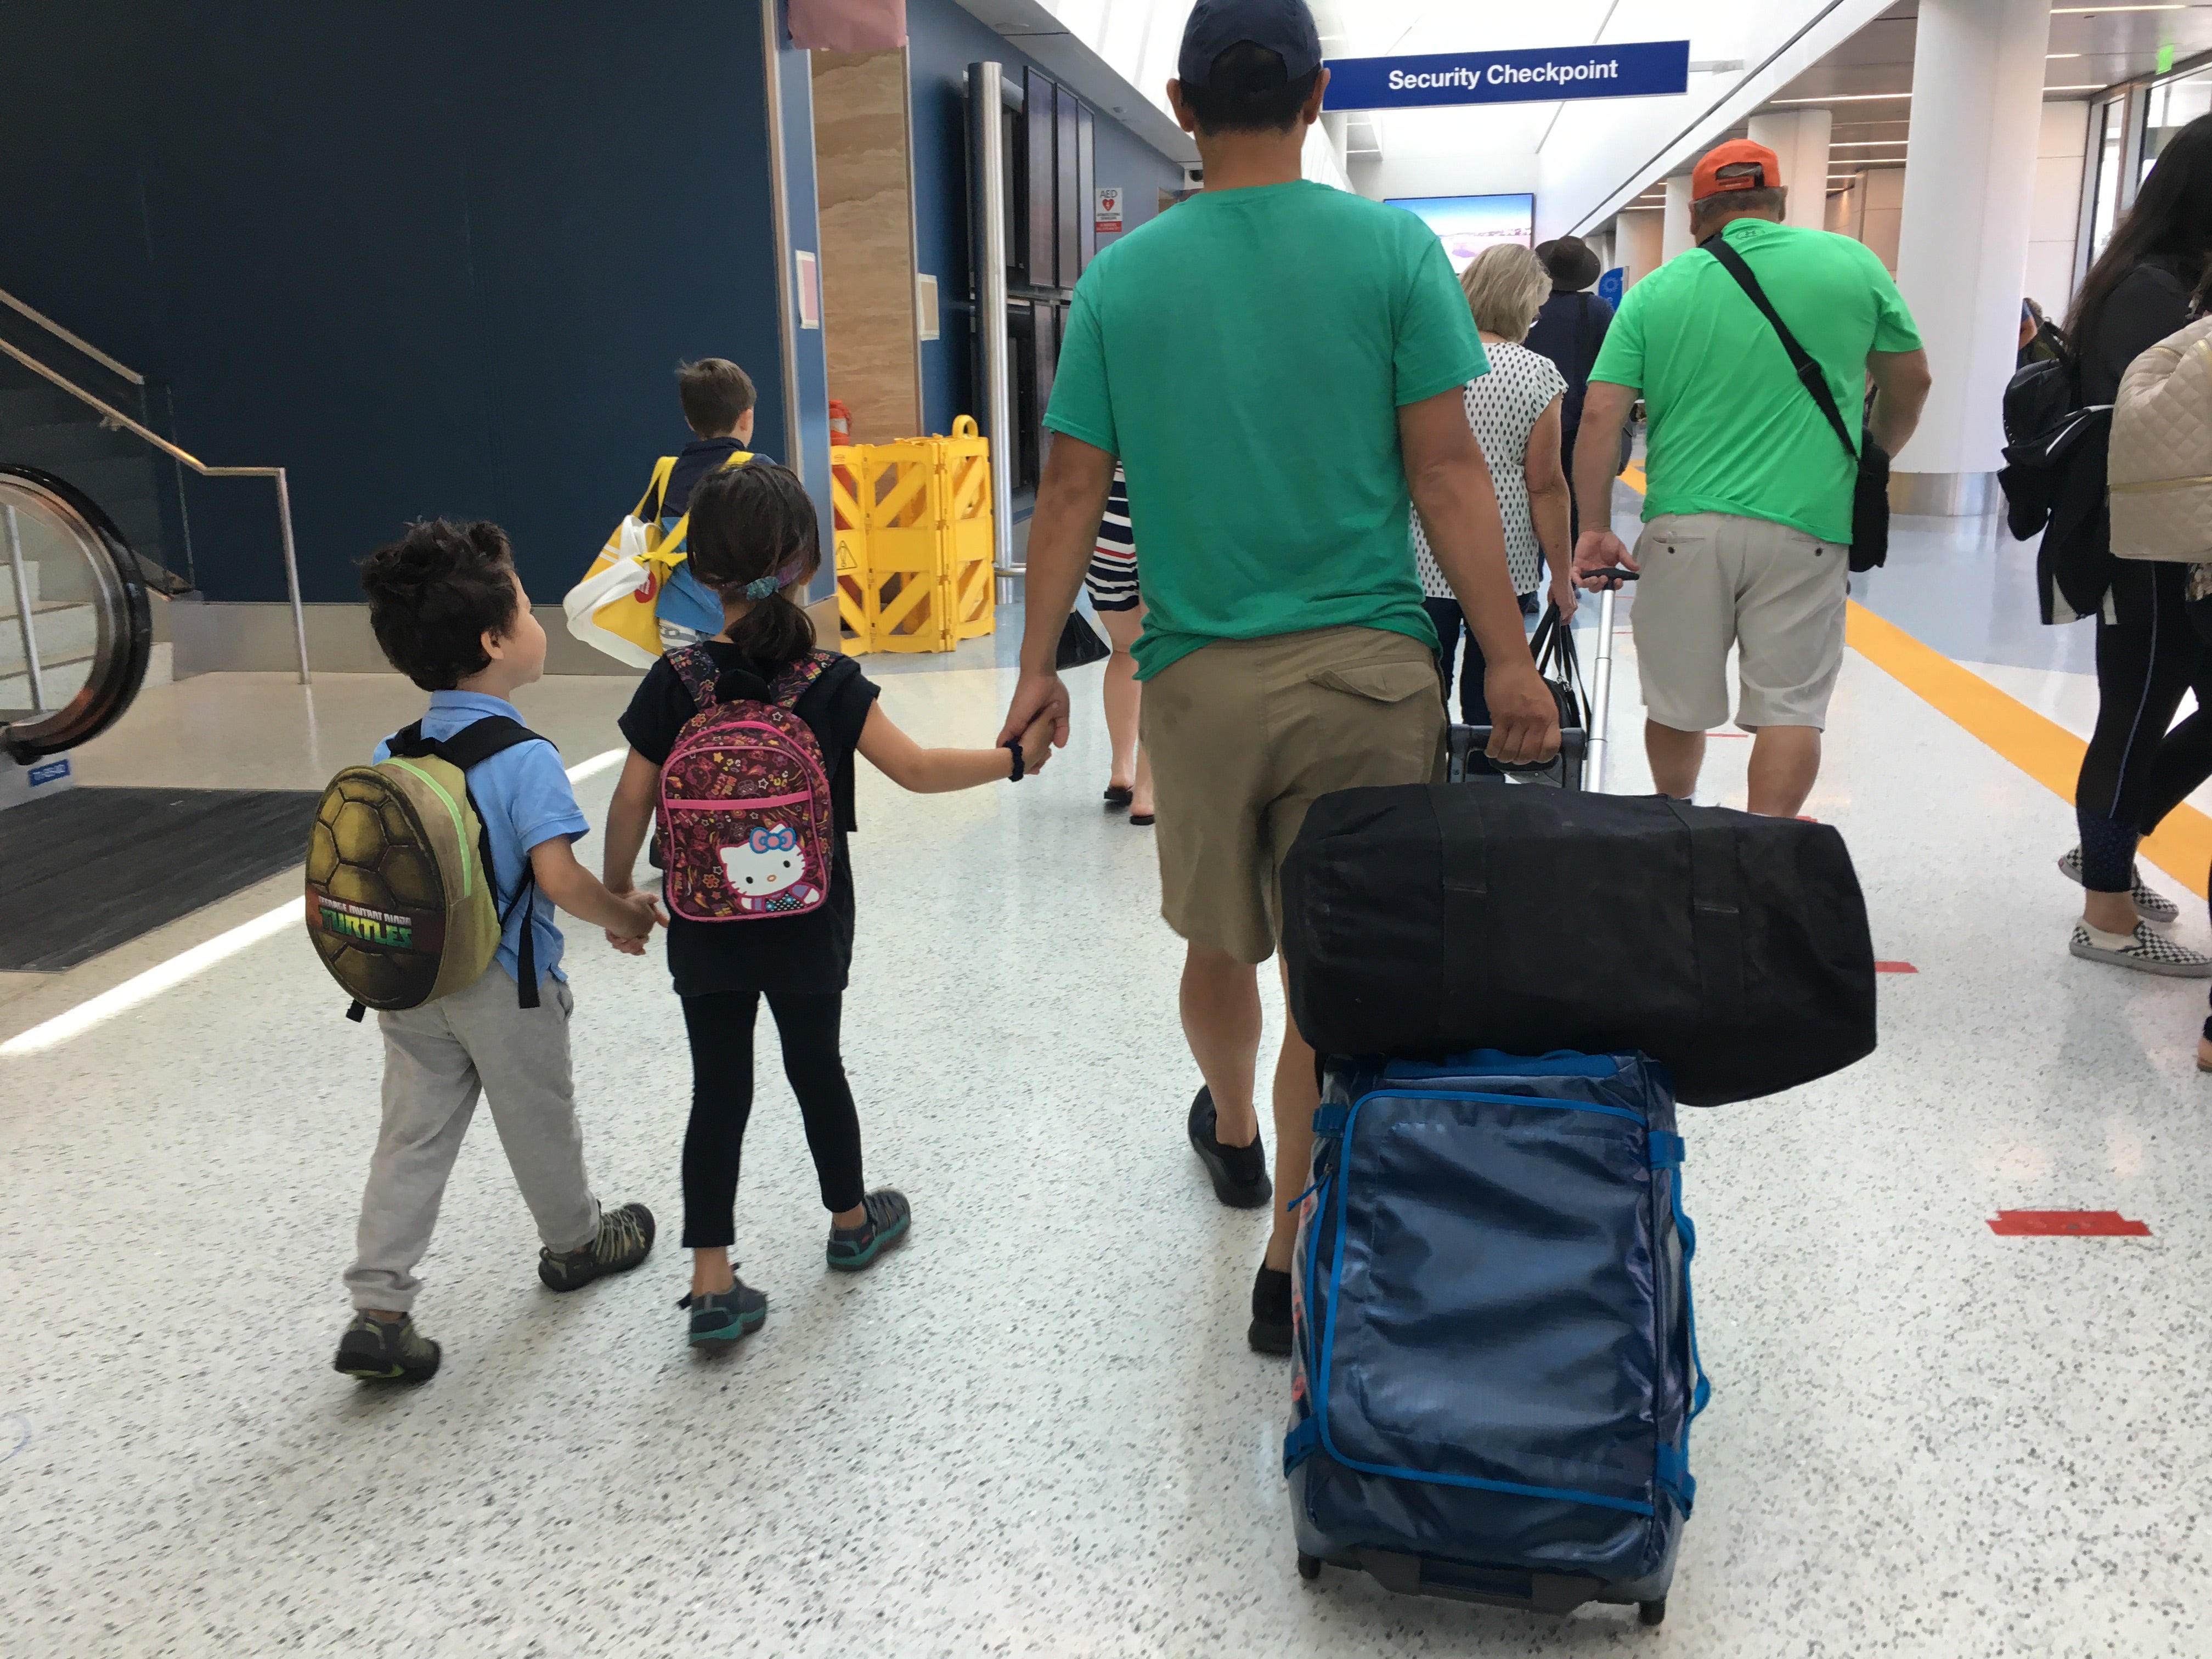 The kids help carry their own bags!